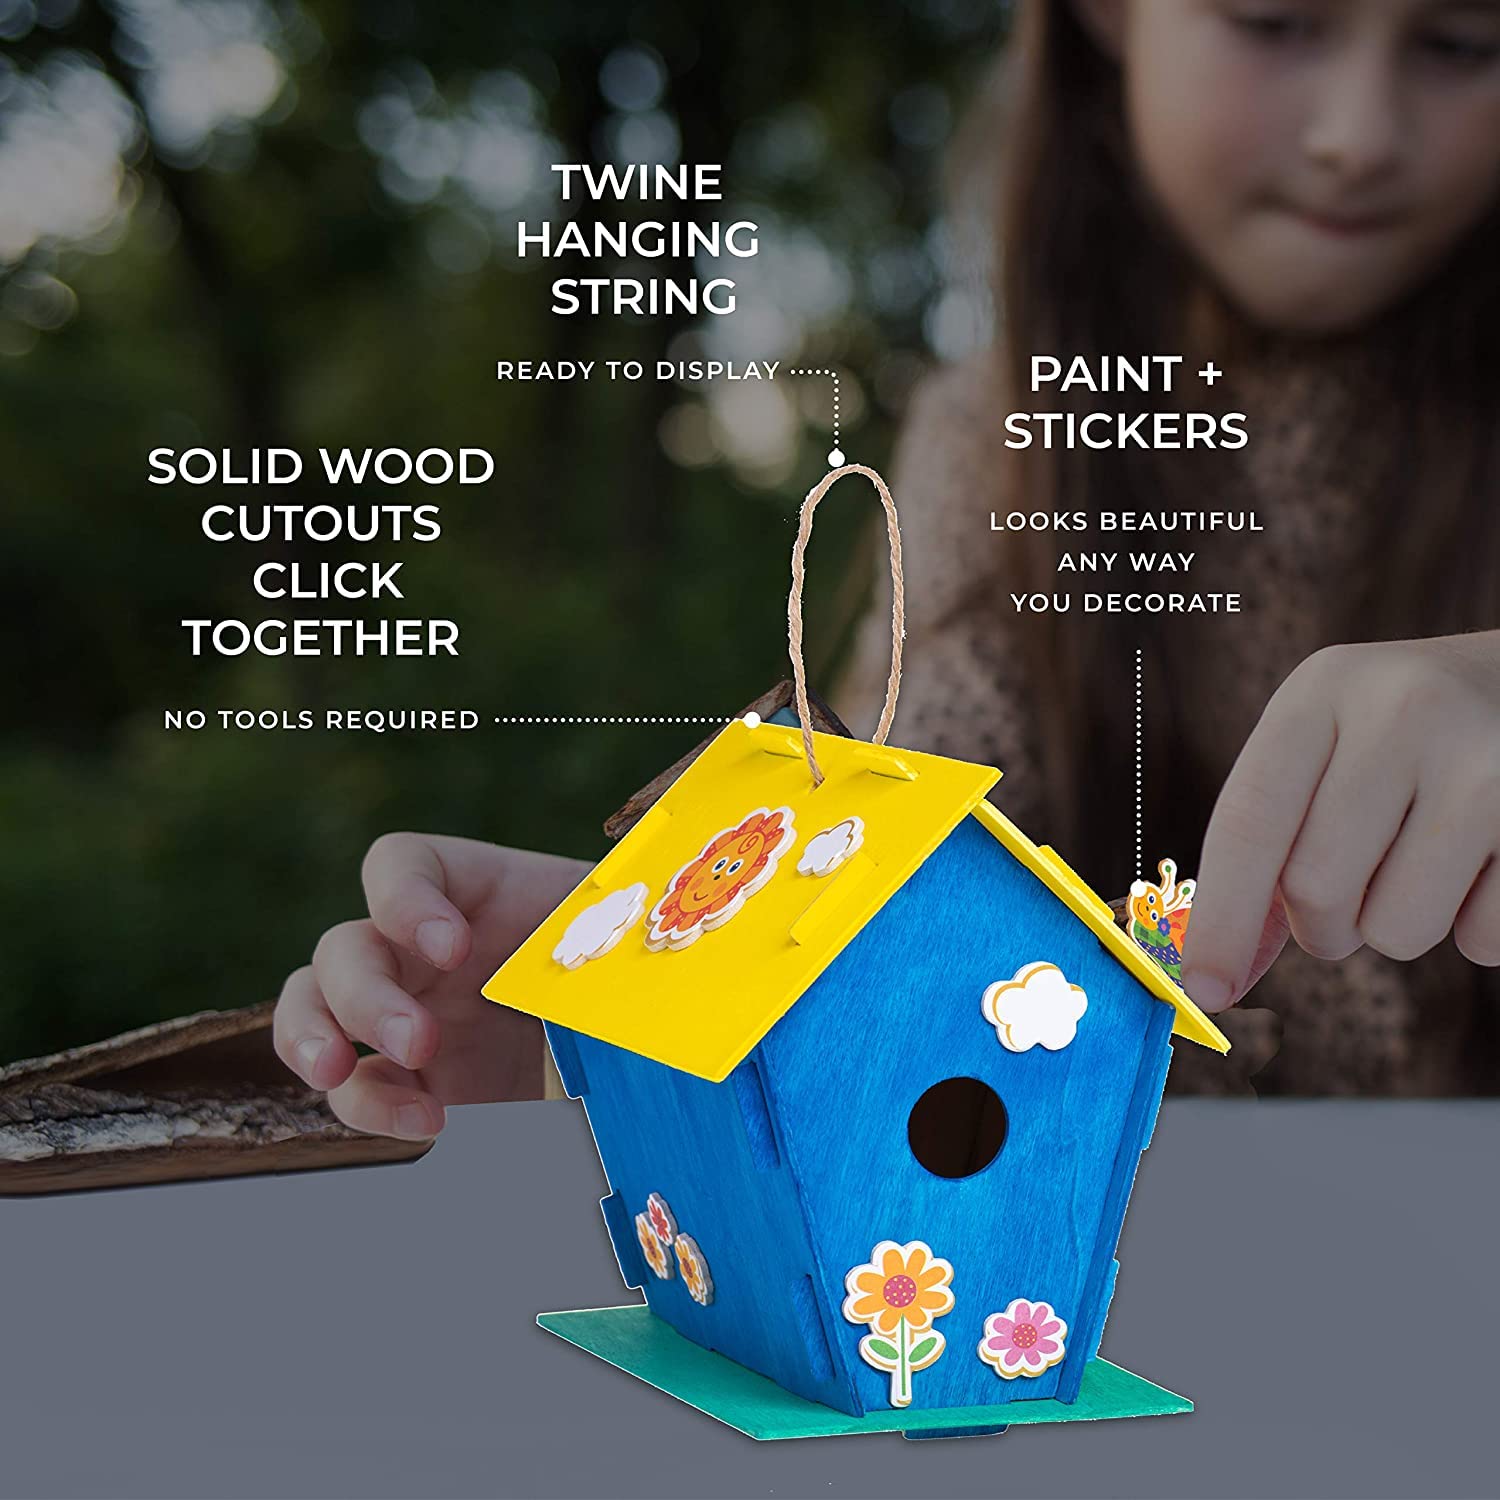 12 Wooden Birdhouses - Crafts for Girls and Boys - Kids Bulk Arts and Crafts Set - 12 DIY Unfinished Wood Birdhouse Kits, 12 Paint Strips, 12 Paintbrushes & Stickers for Children to Build & Paint